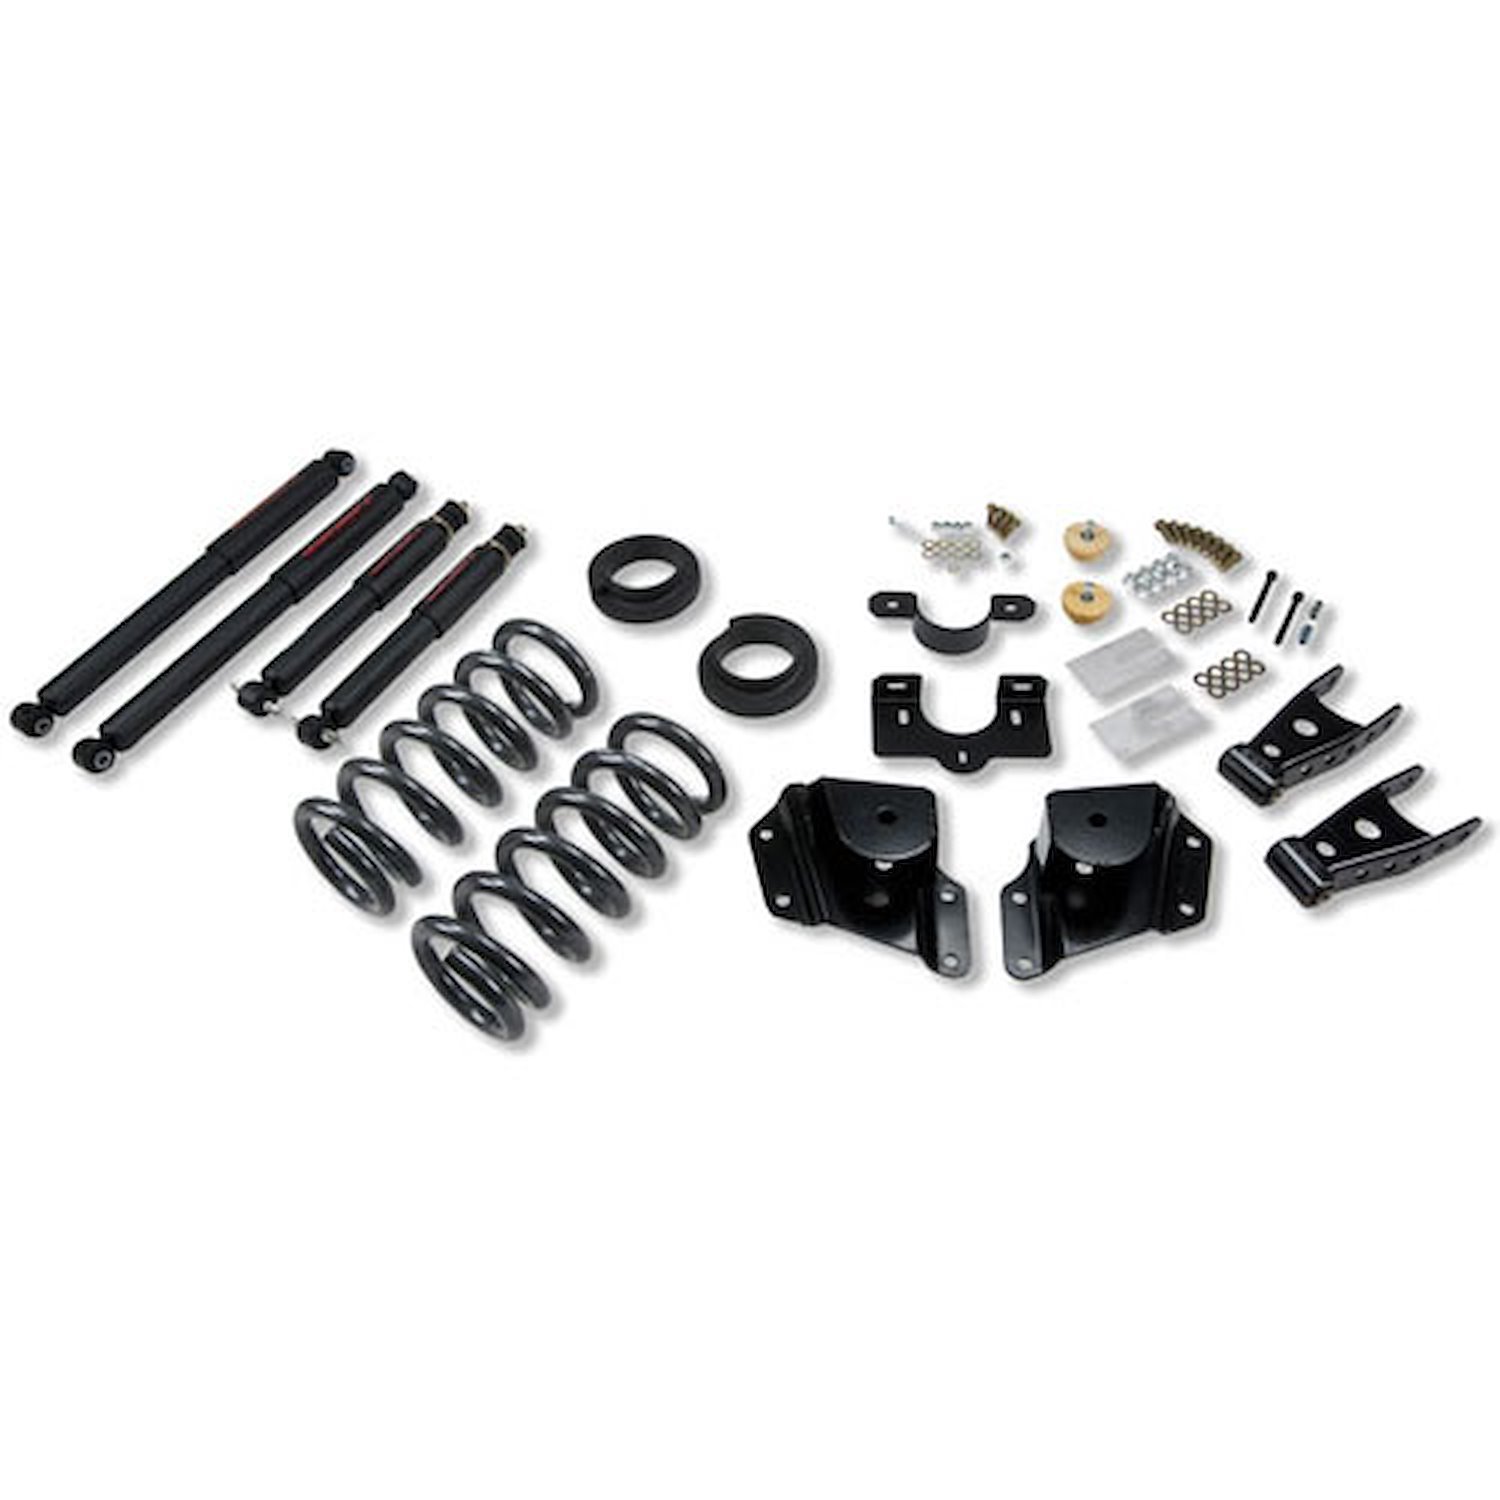 Complete Lowering Kit for 1999-2006 Chevy Silverado/GMC Sierra 1500 Extended Cab